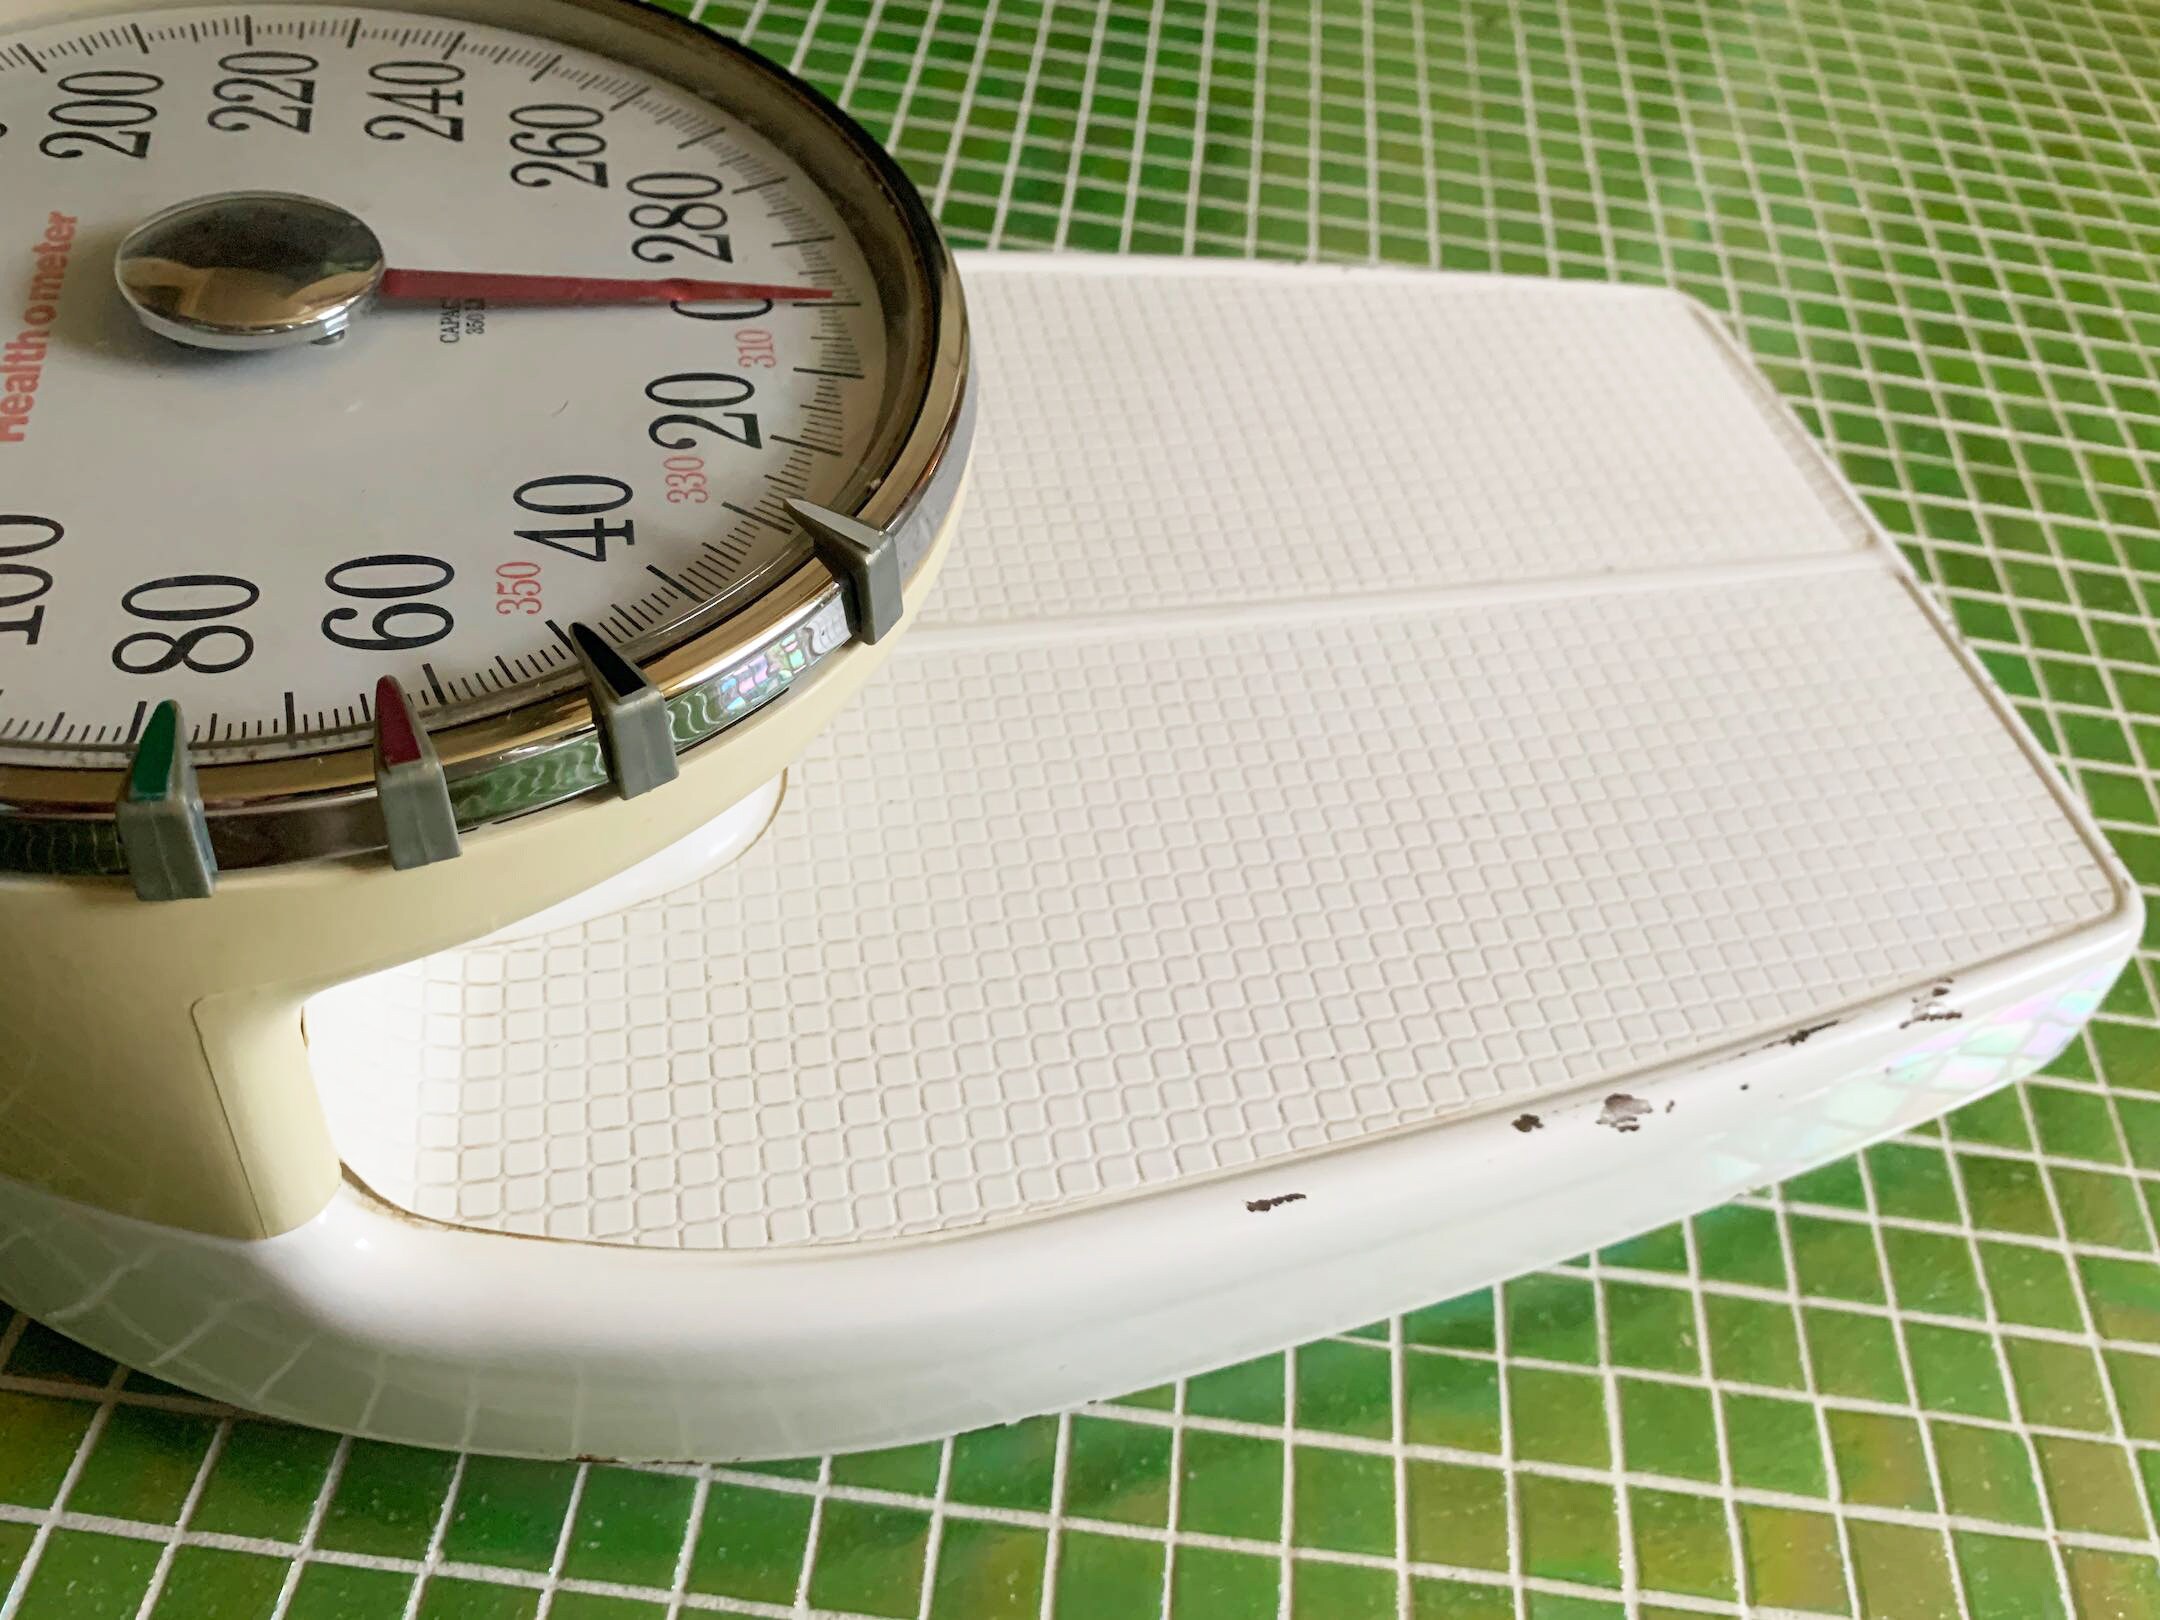 vintage Metro Analog White 0 to 300 Lbs. Bathroom Scale - in good working  shape